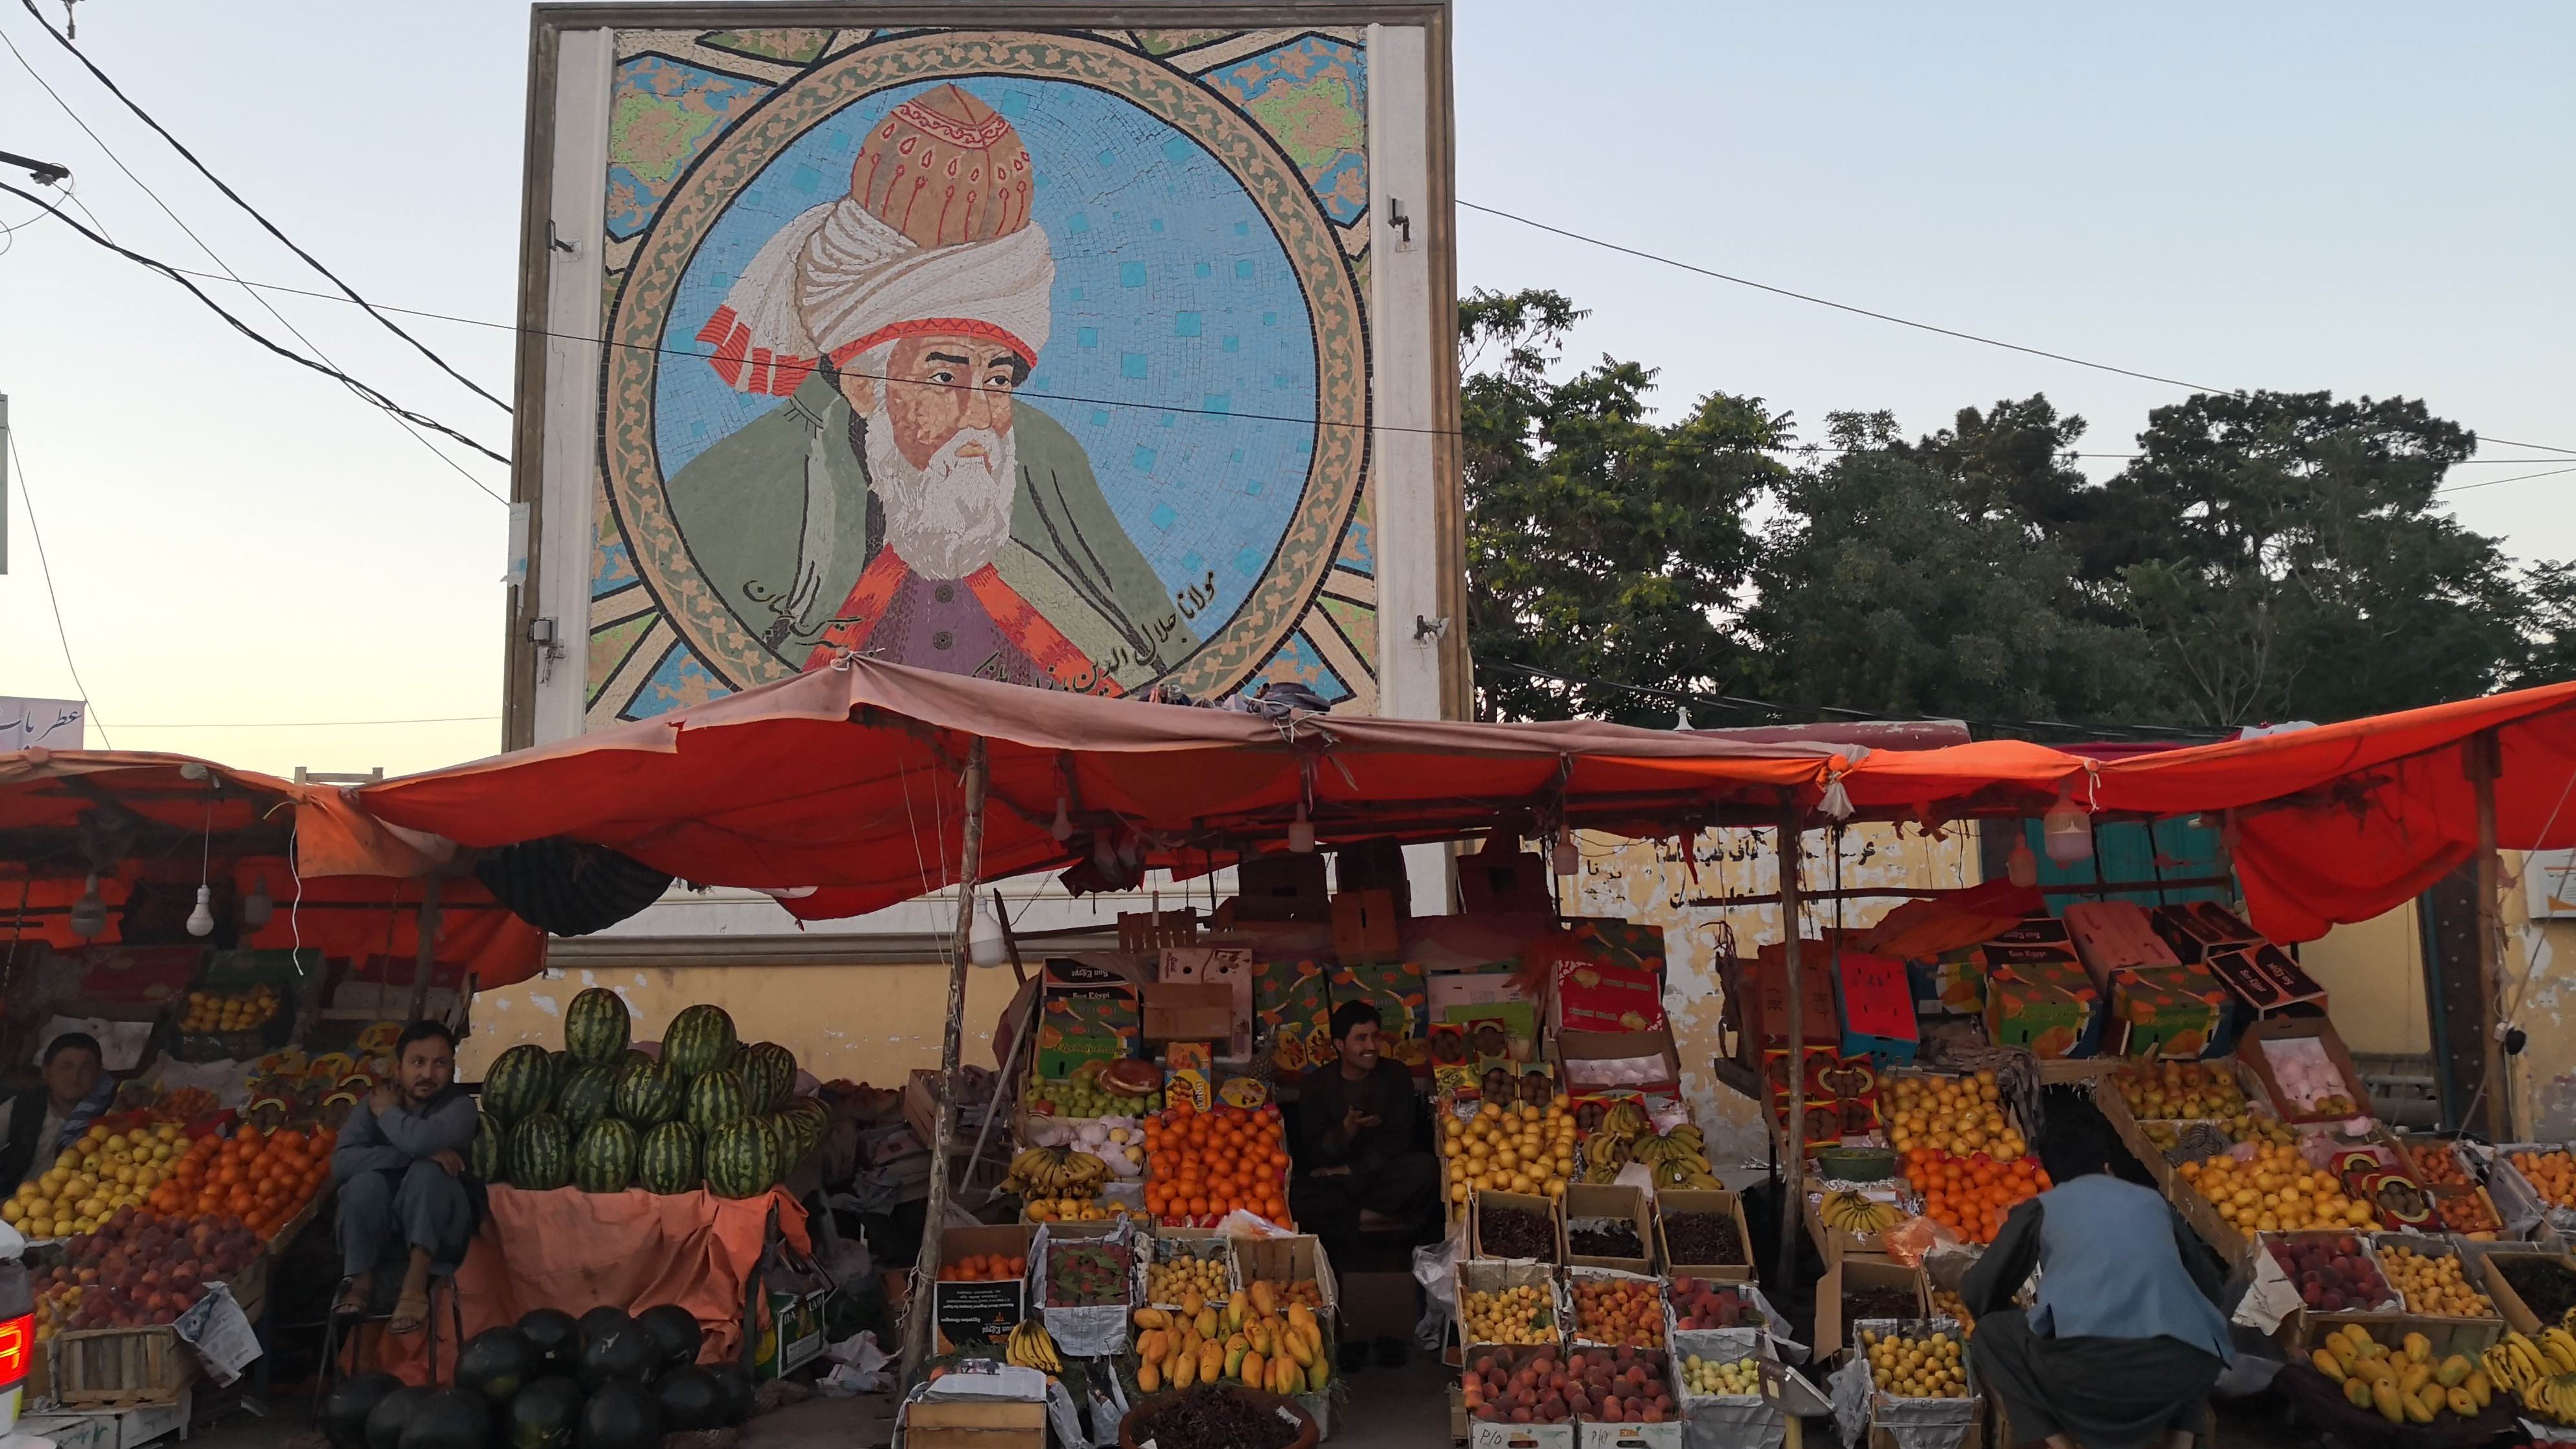 An image of Rumi above a market stall (photo: Marian Brehmer)